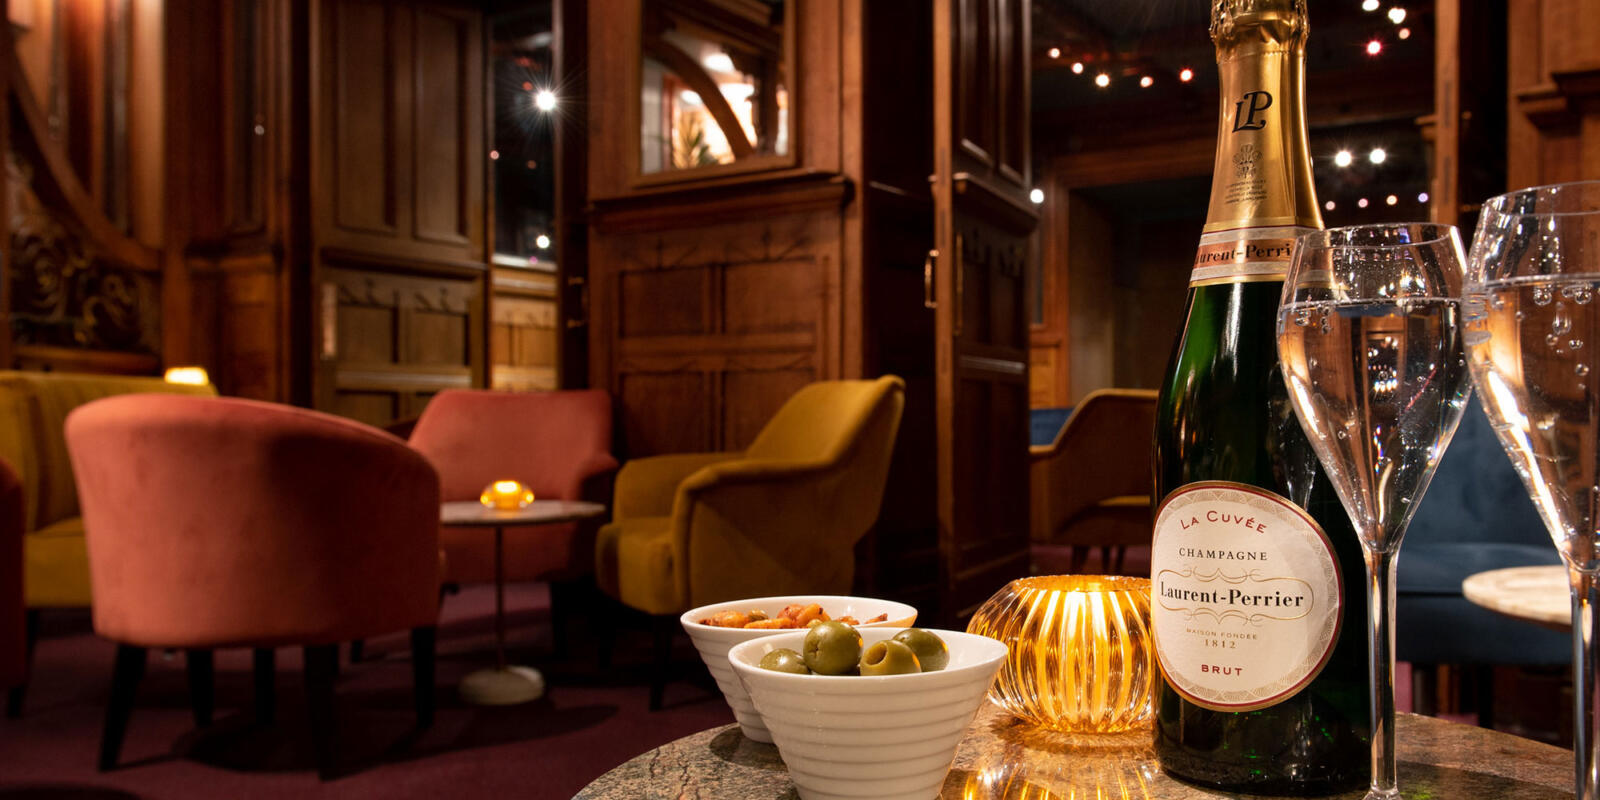 Image of a bottle of Laurent Perrier champagne in the American Bar room at the London Coliseum